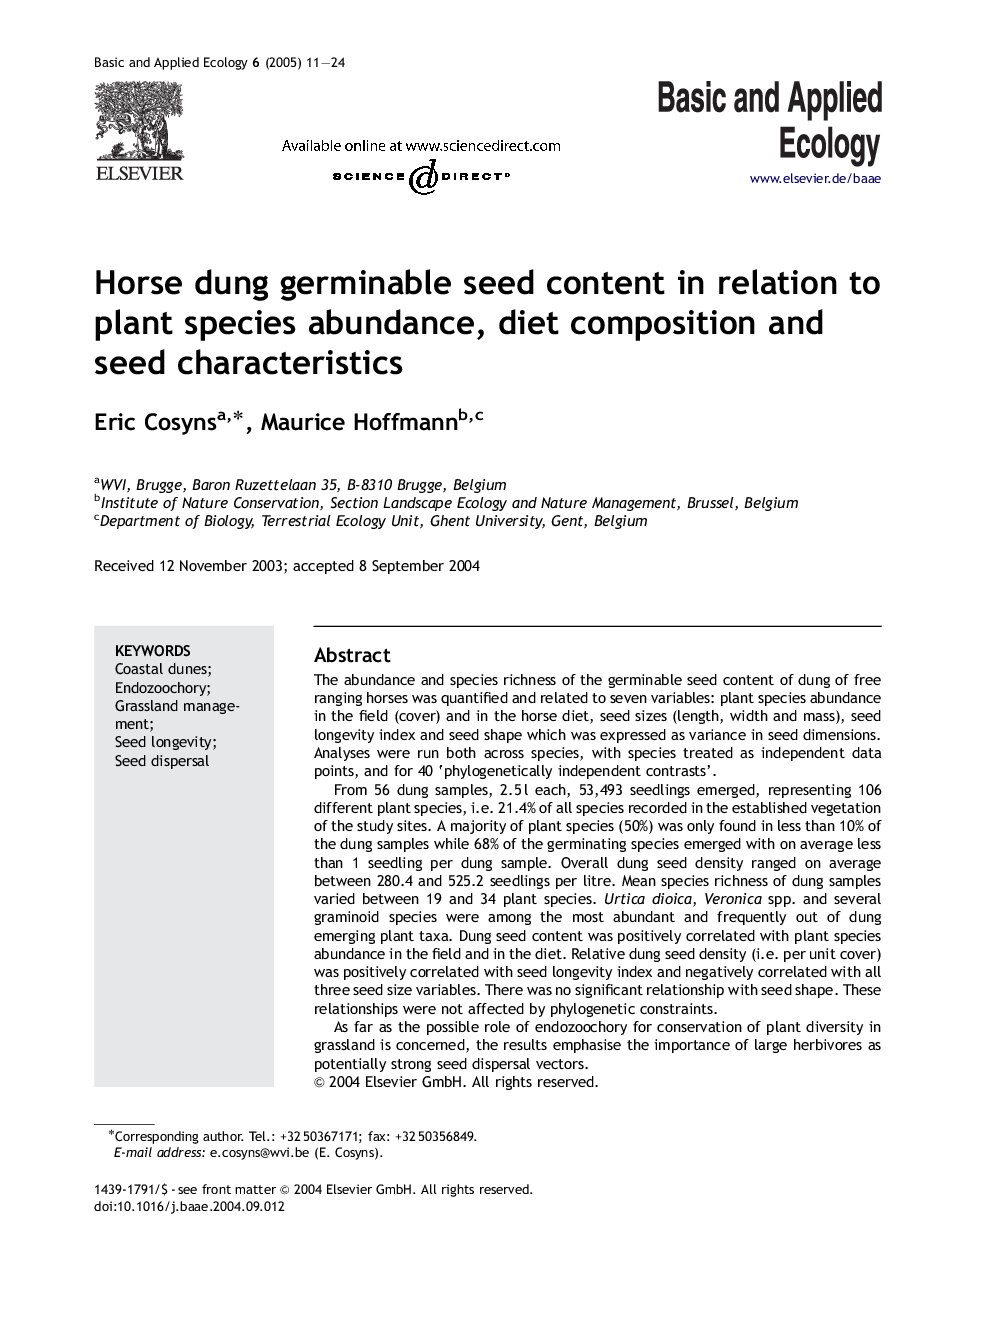 Horse dung germinable seed content in relation to plant species abundance, diet composition and seed characteristics